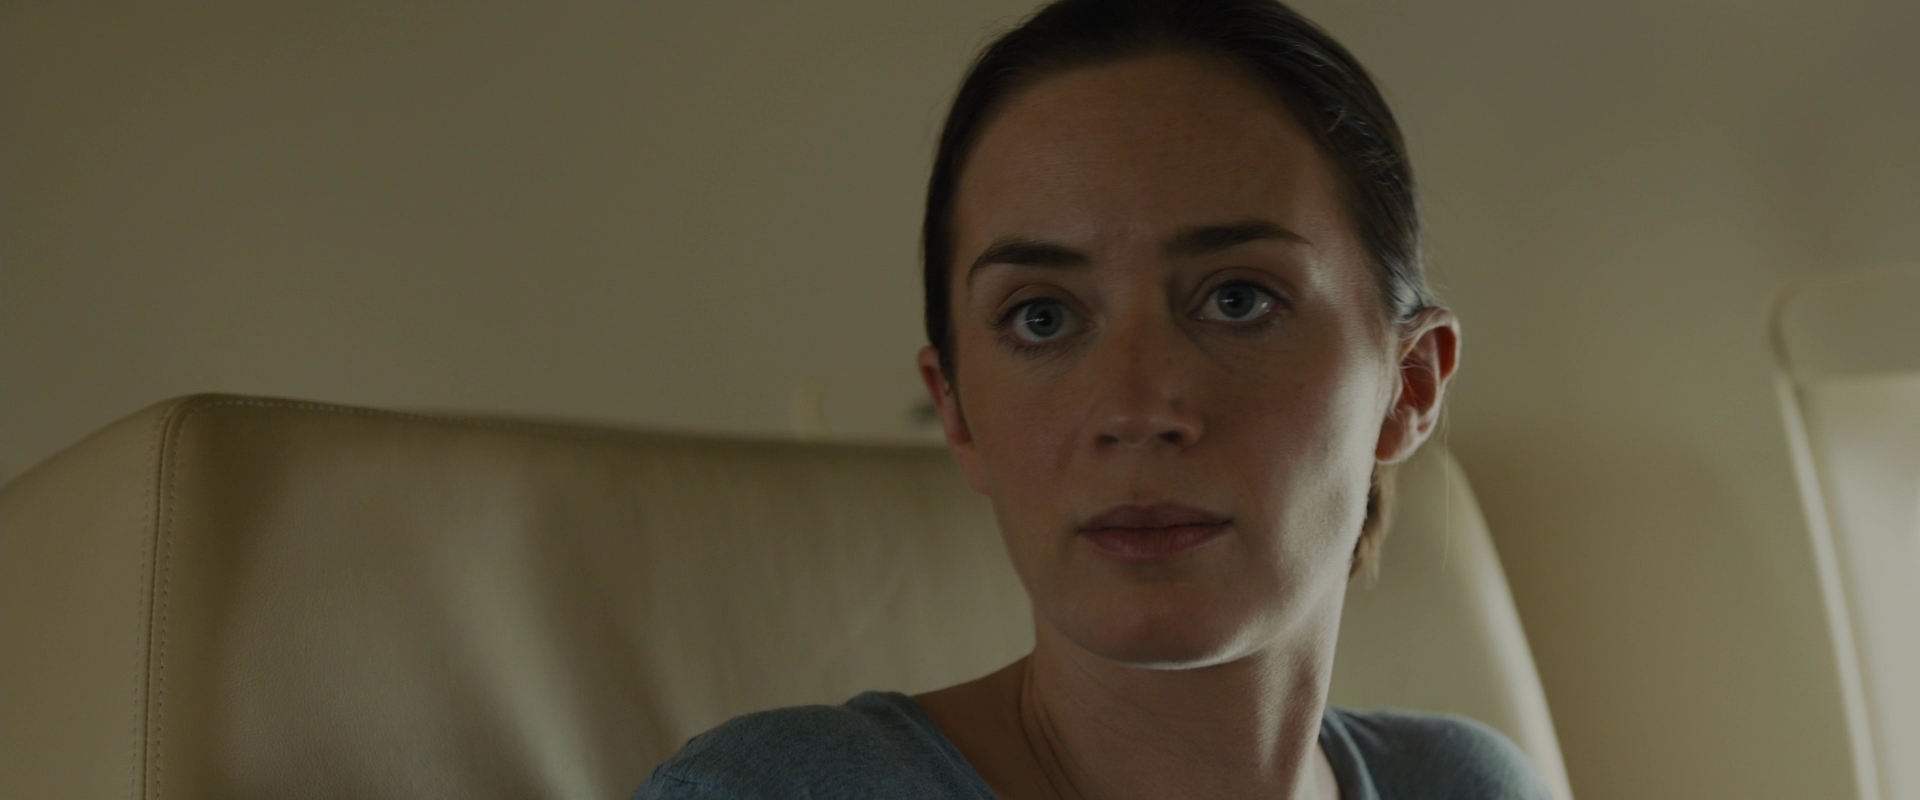 Screen Captures Sicario Emily Blunt Fans Image Gallery Hot Sex Picture